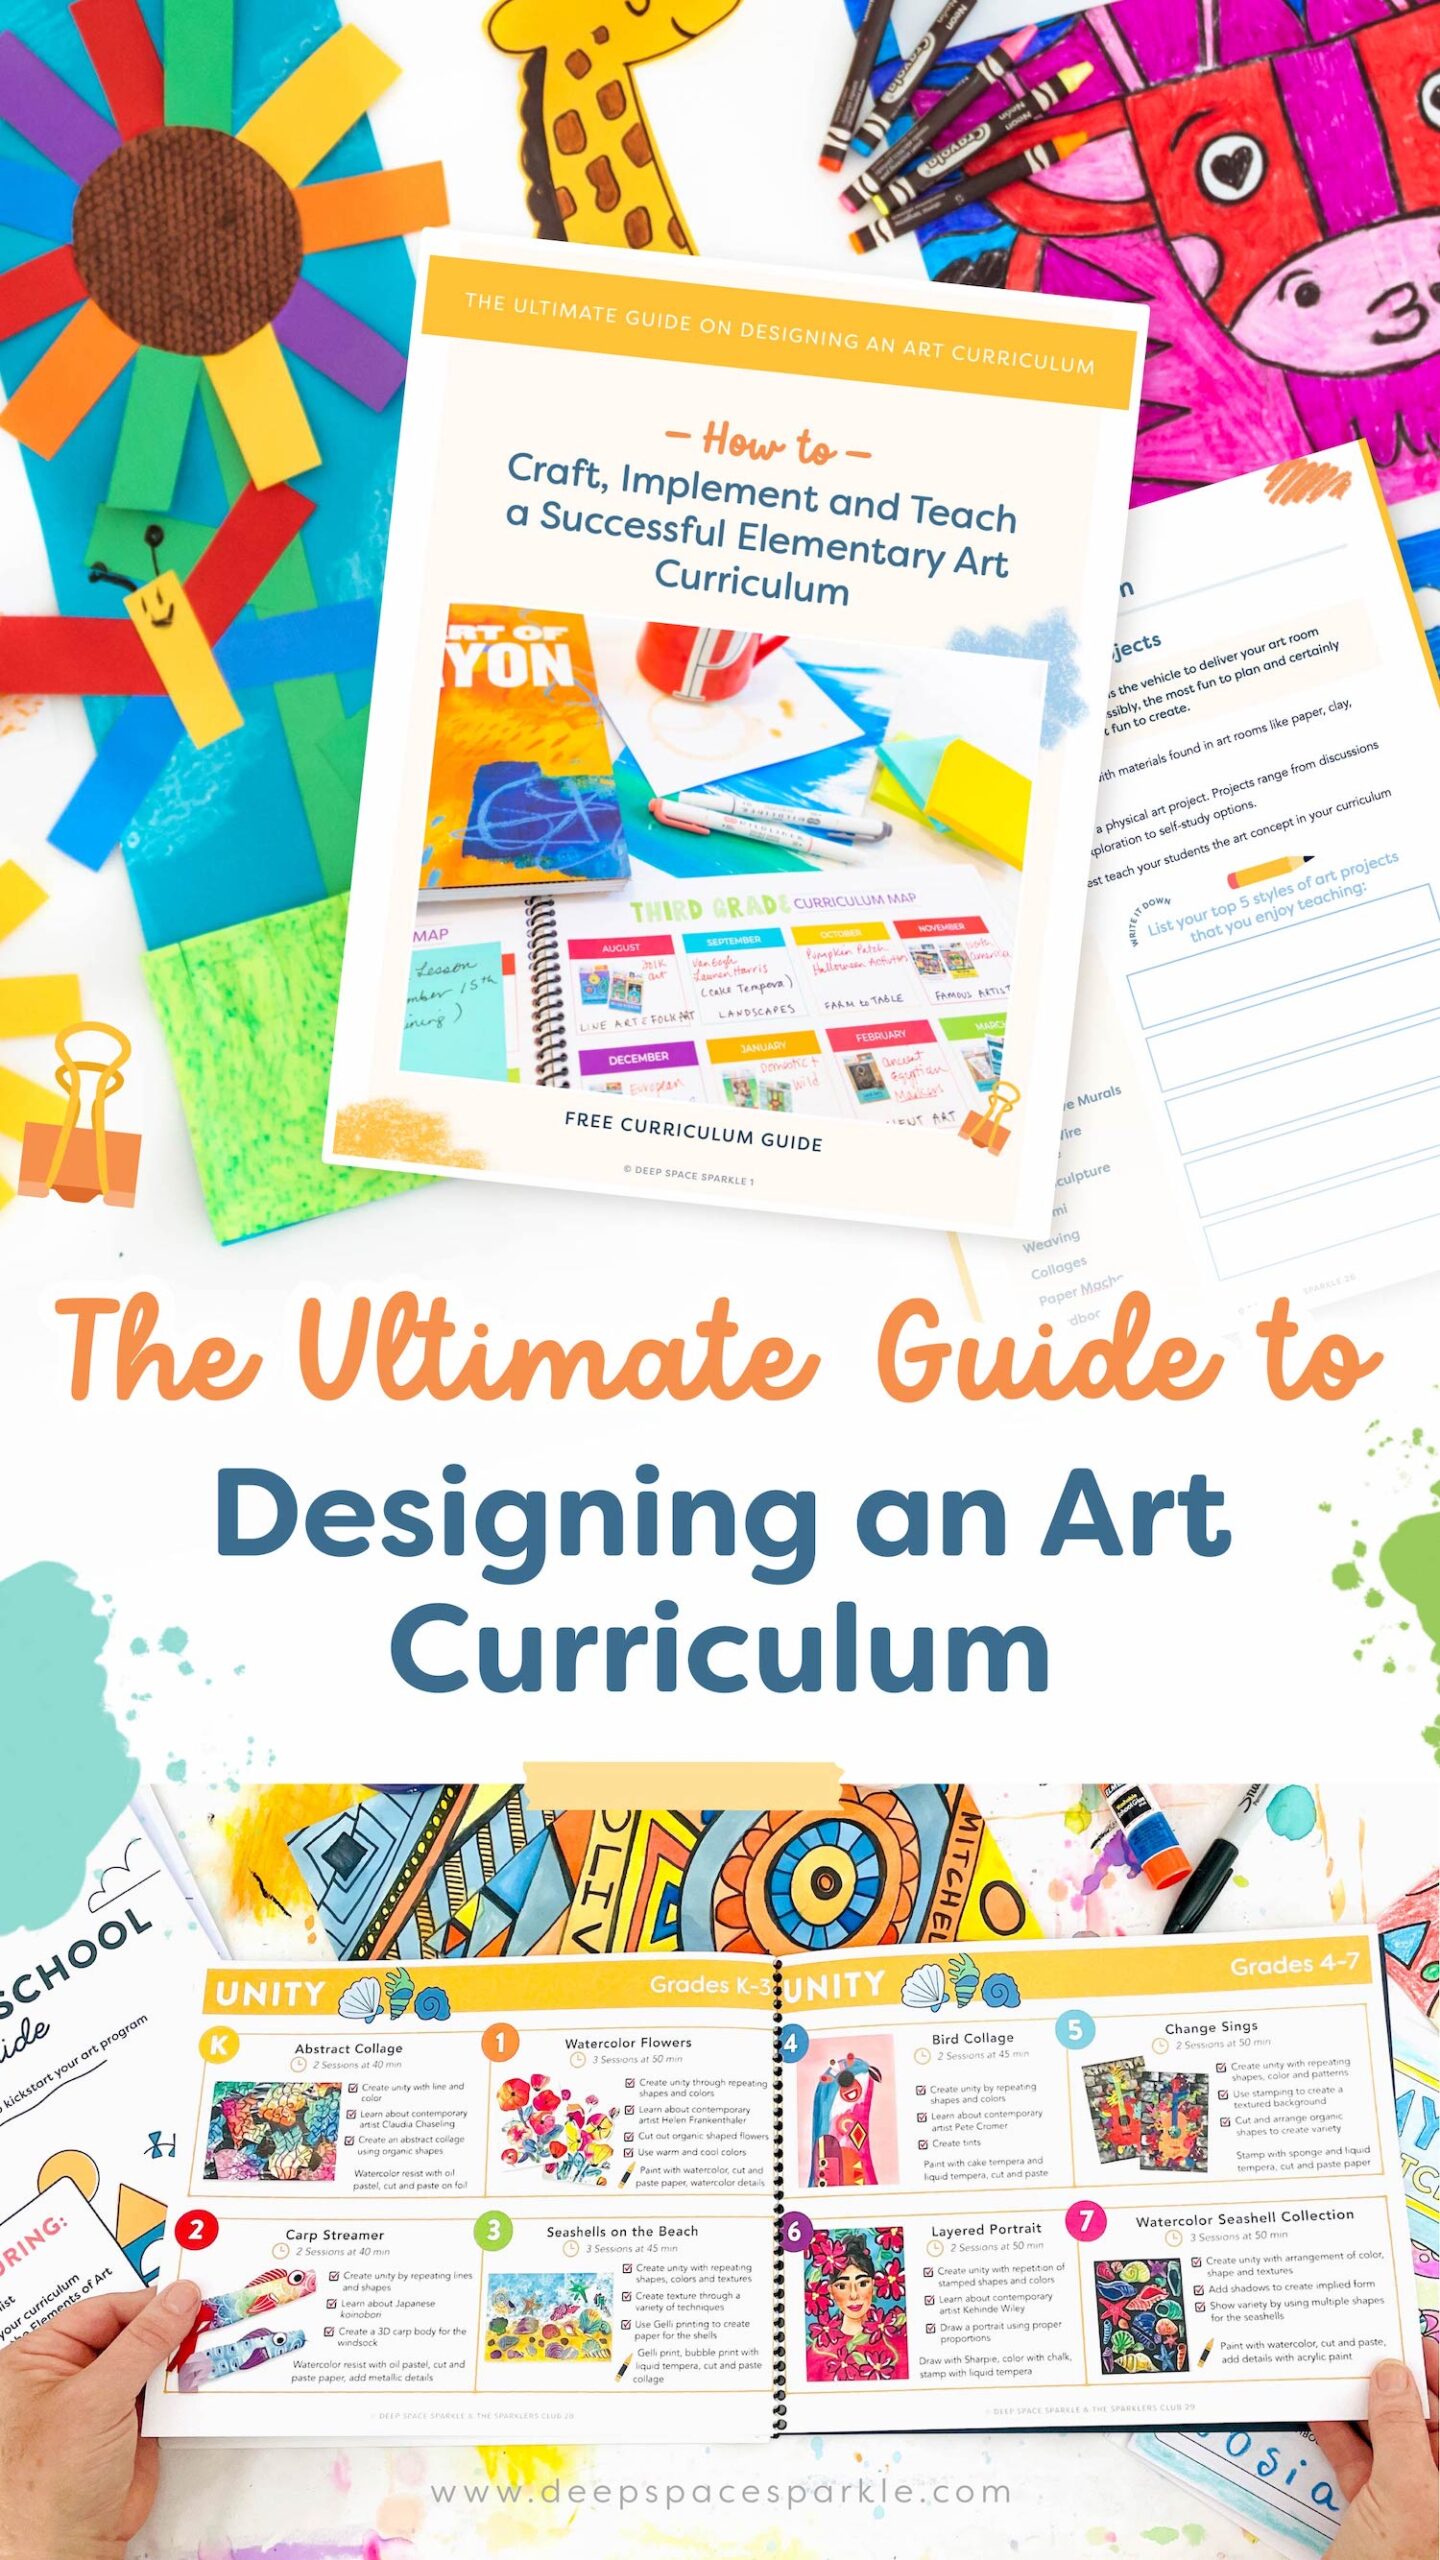 The Ultimate Guide on Designing an Art Curriculum with How-To Download for Art Teachers. Craft, Implement and Teach a Successful Elementary Art Curriculum.